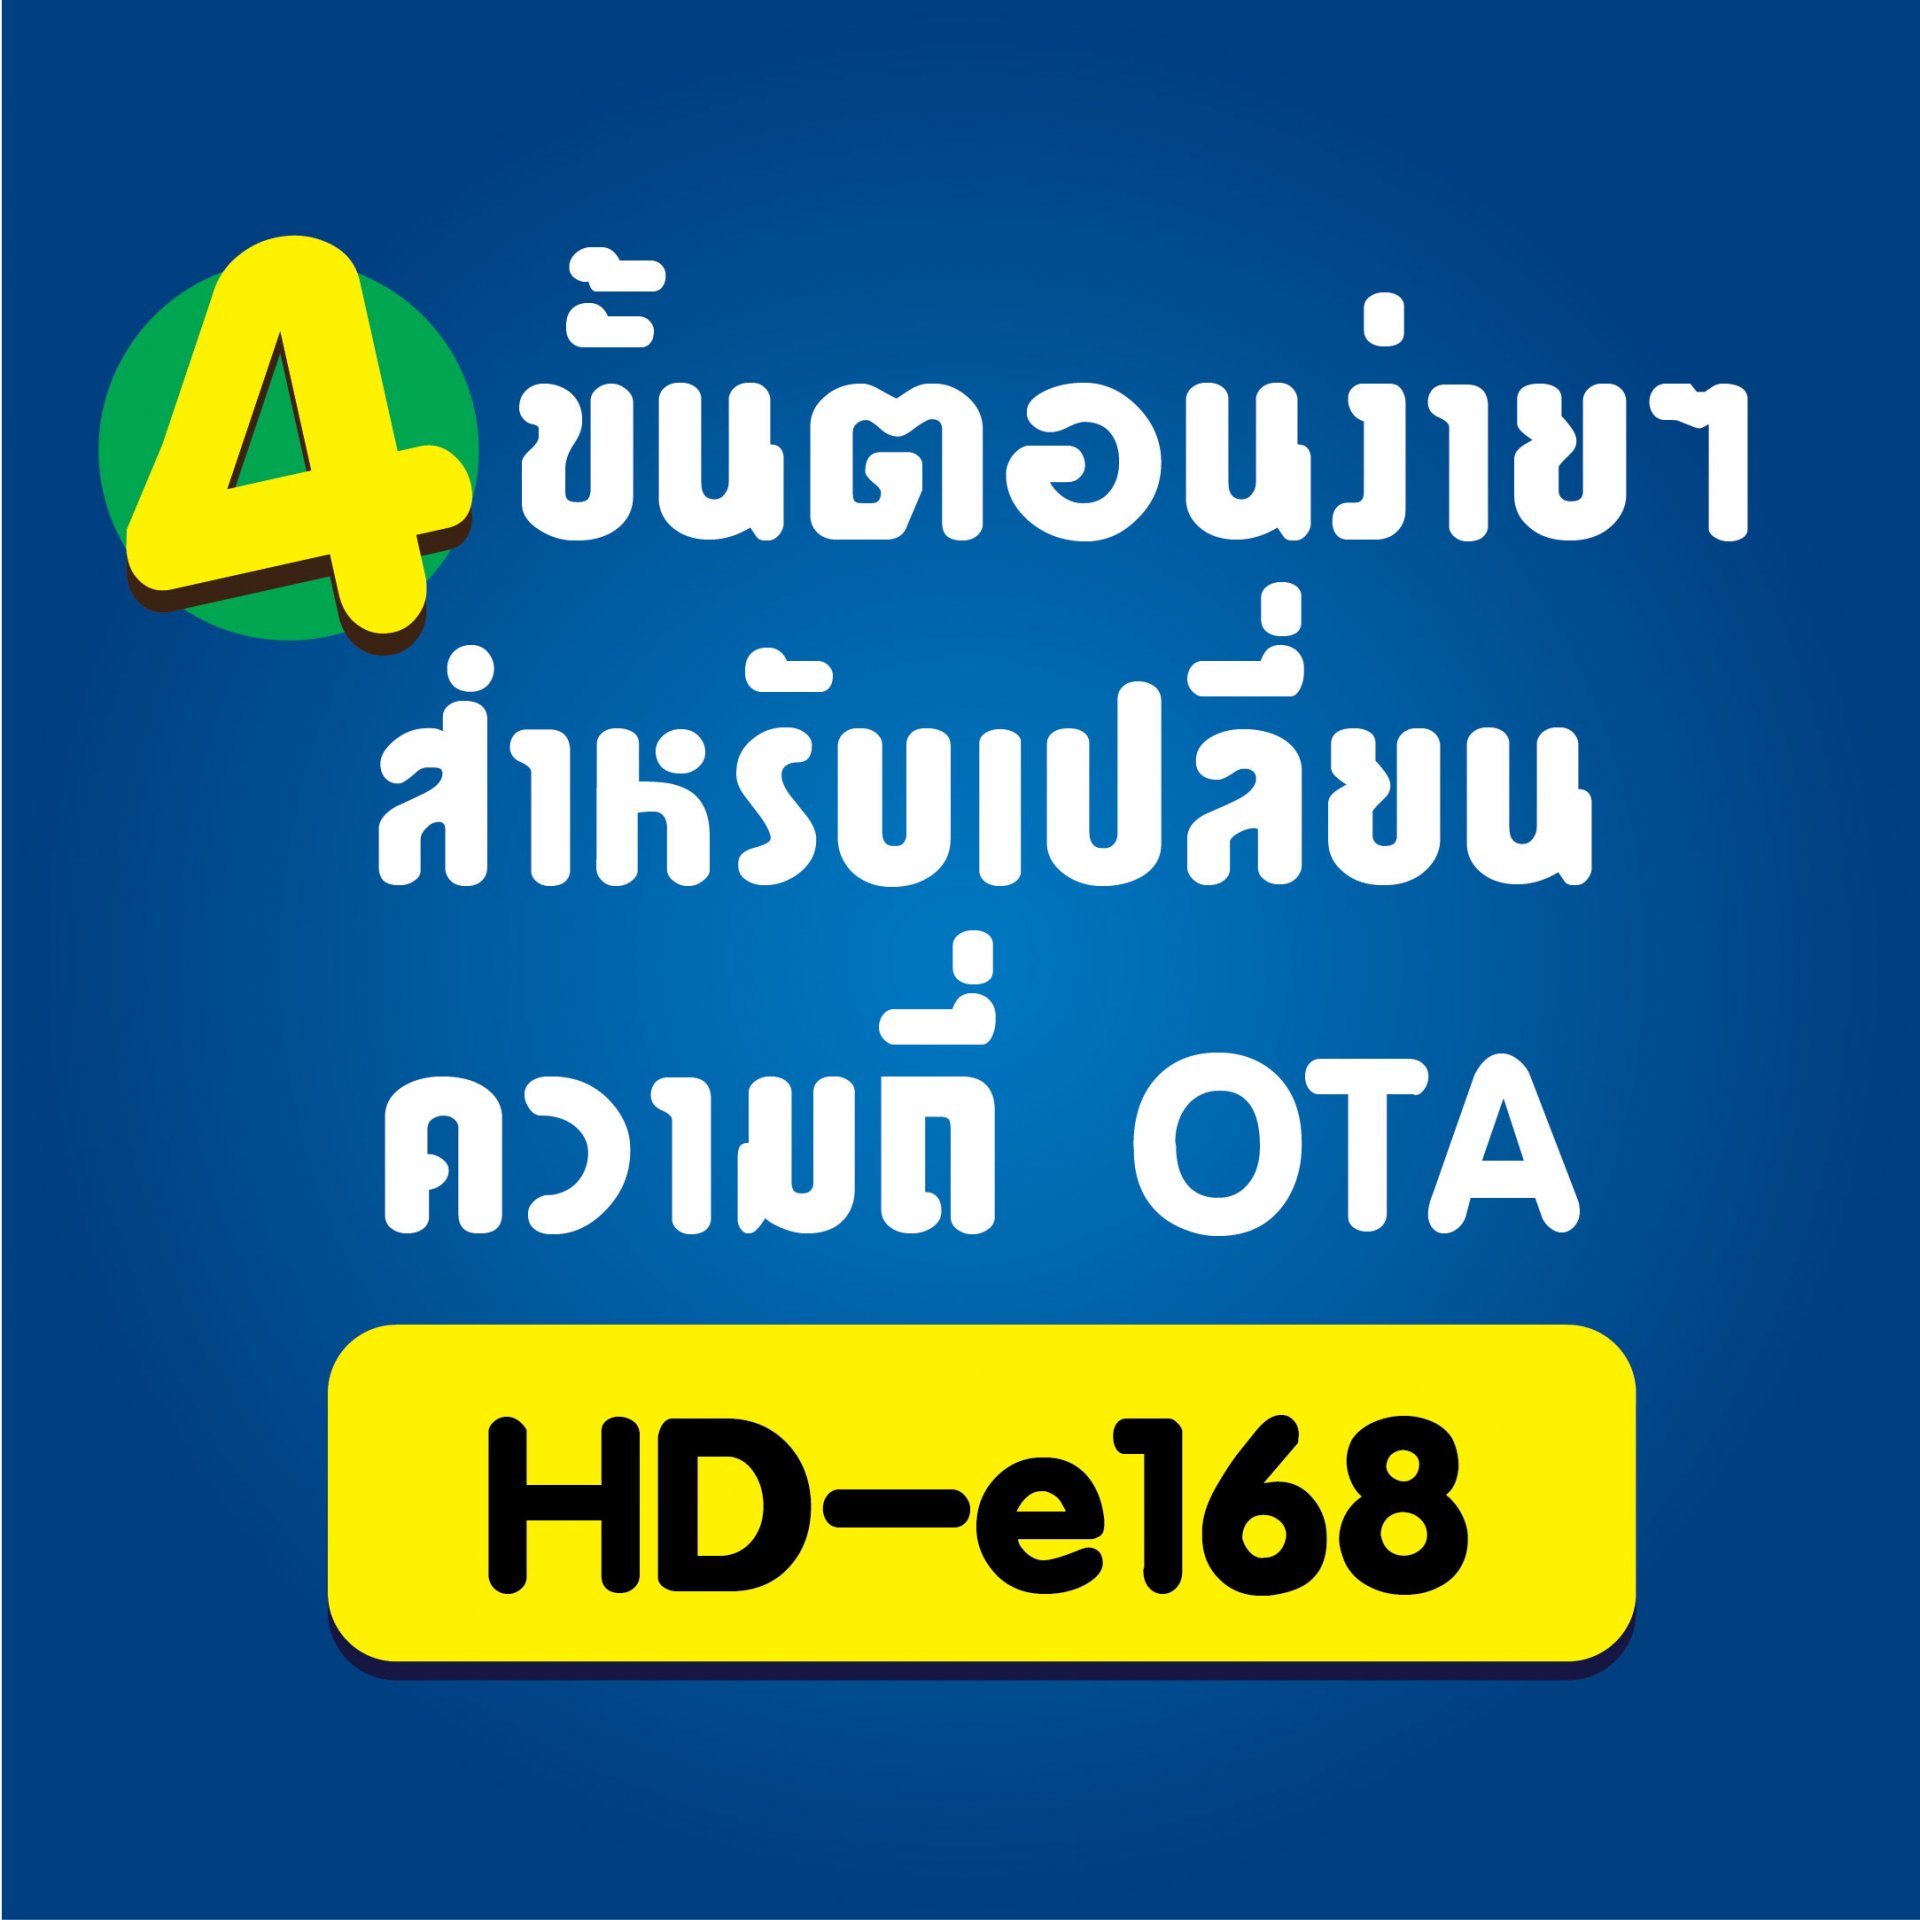 4 steps for changing the OTA frequency of the HD-e168